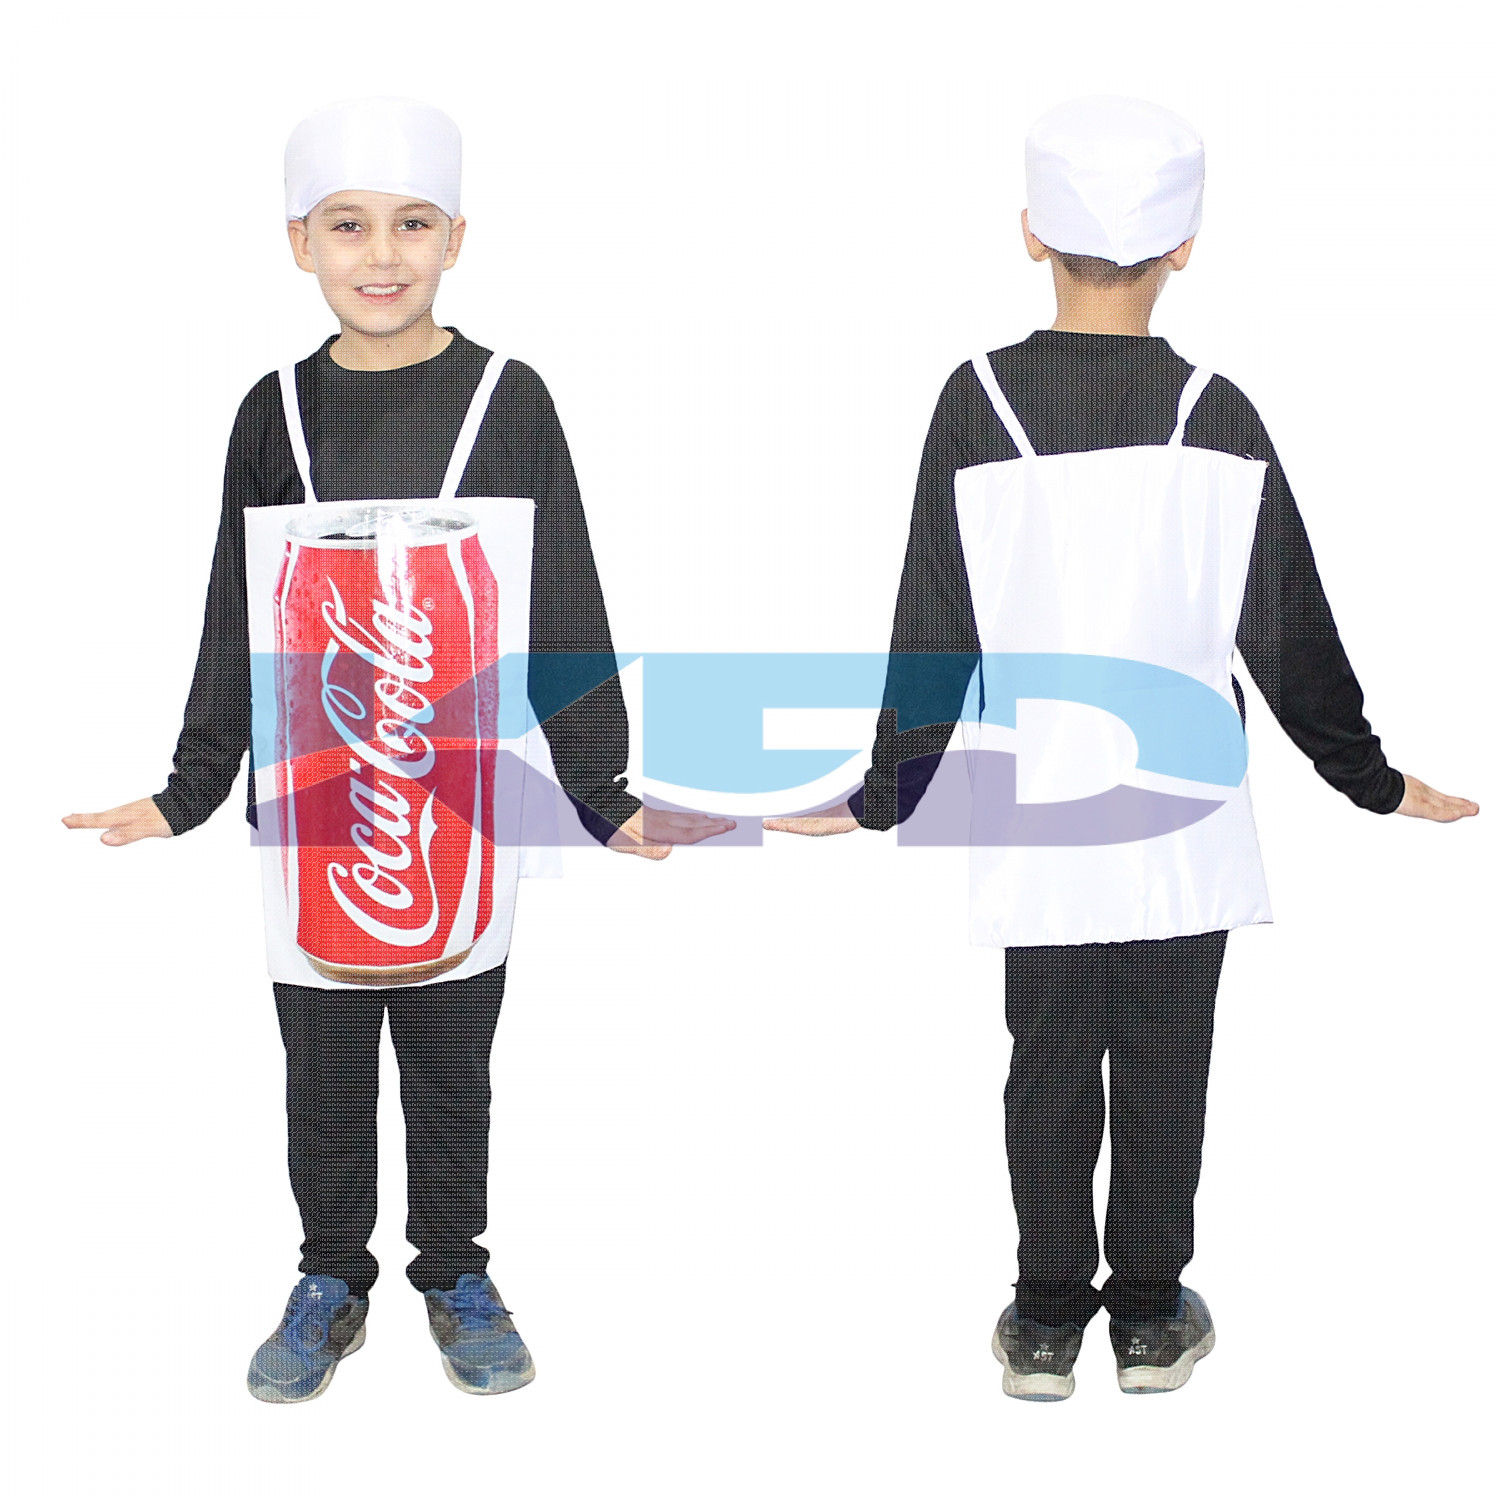 Coca Cola fancy dress for kids,Object Costume for School Annual function/Theme Party/Competition/Stage Shows Dress